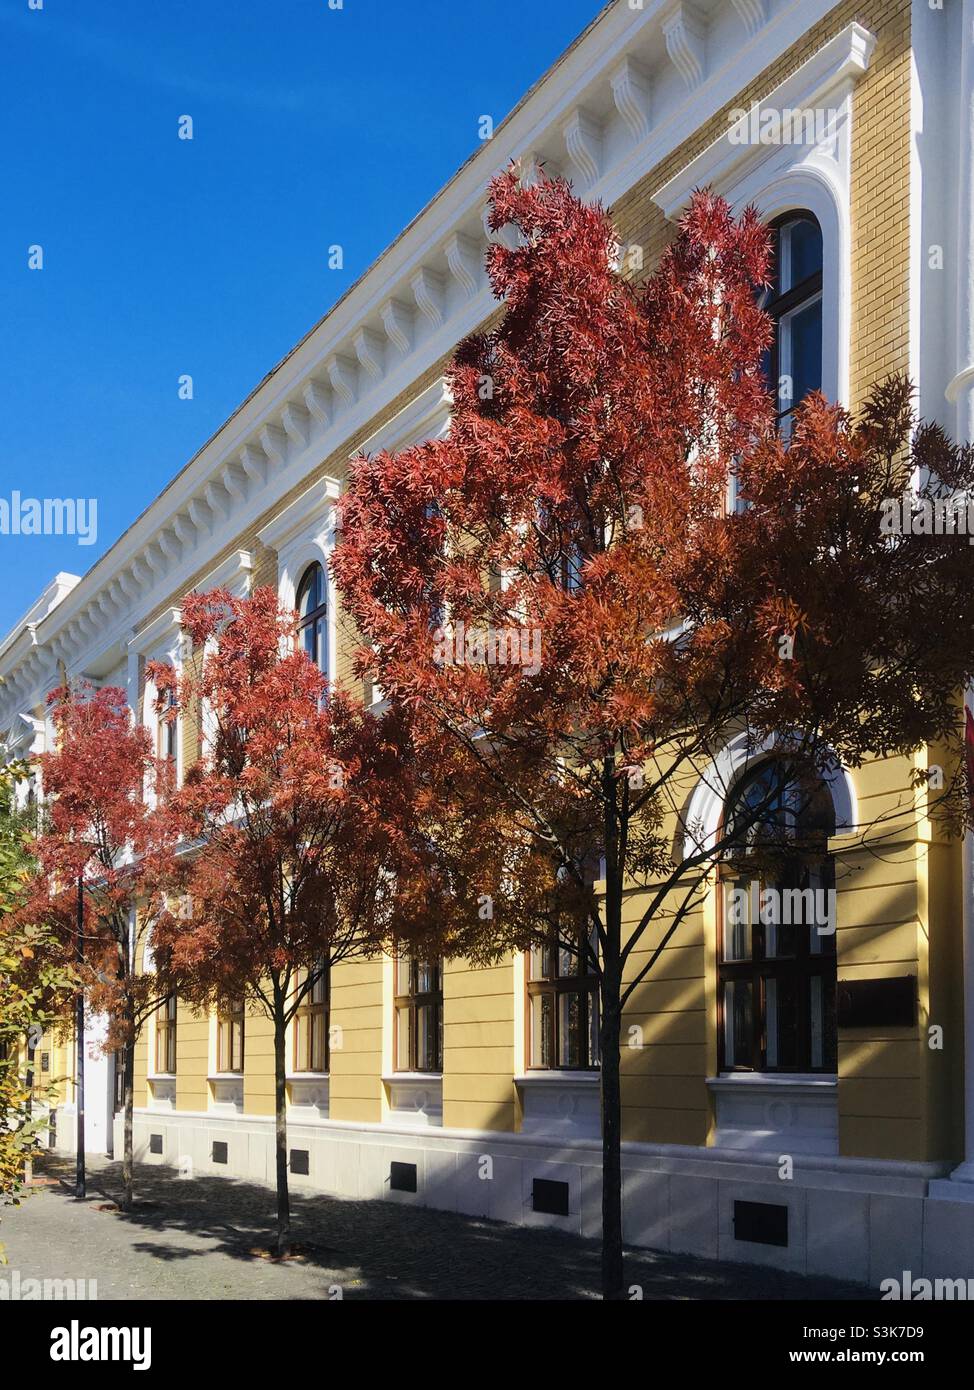 Colourful trees in front of 19th century building facade in autumn, Sopron, Hungary Stock Photo